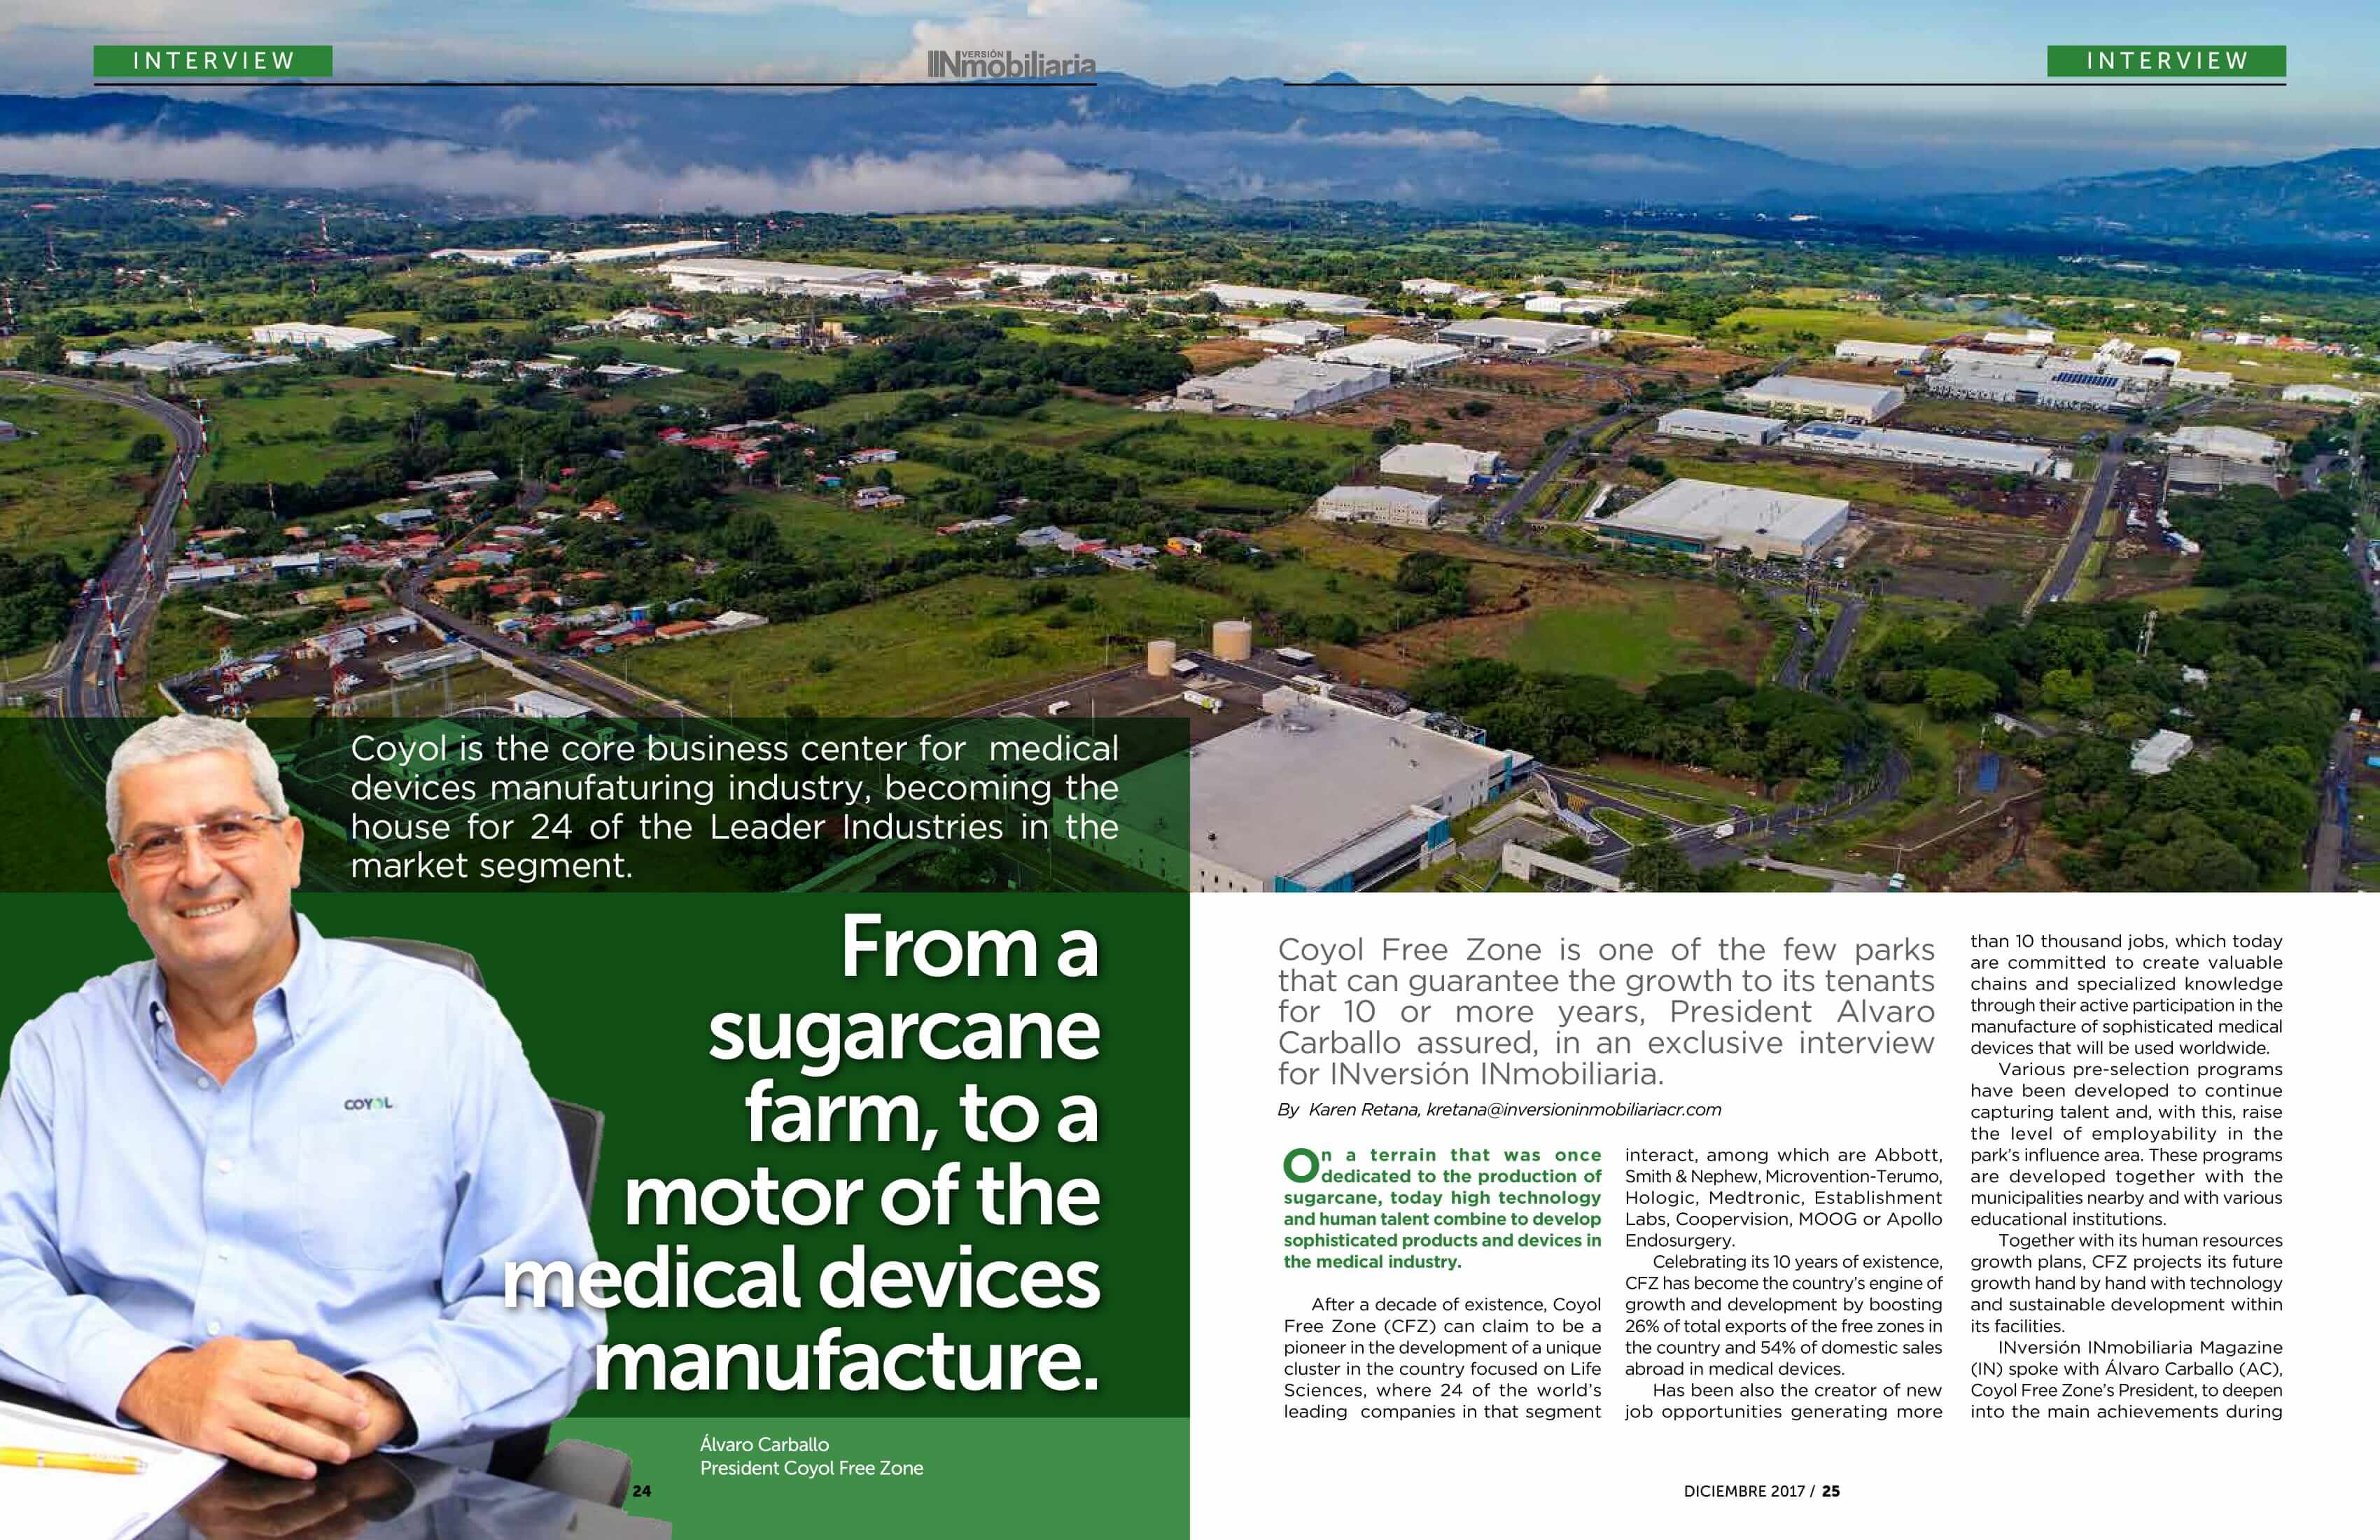 From a sugarcane farm to medical devices manufacture